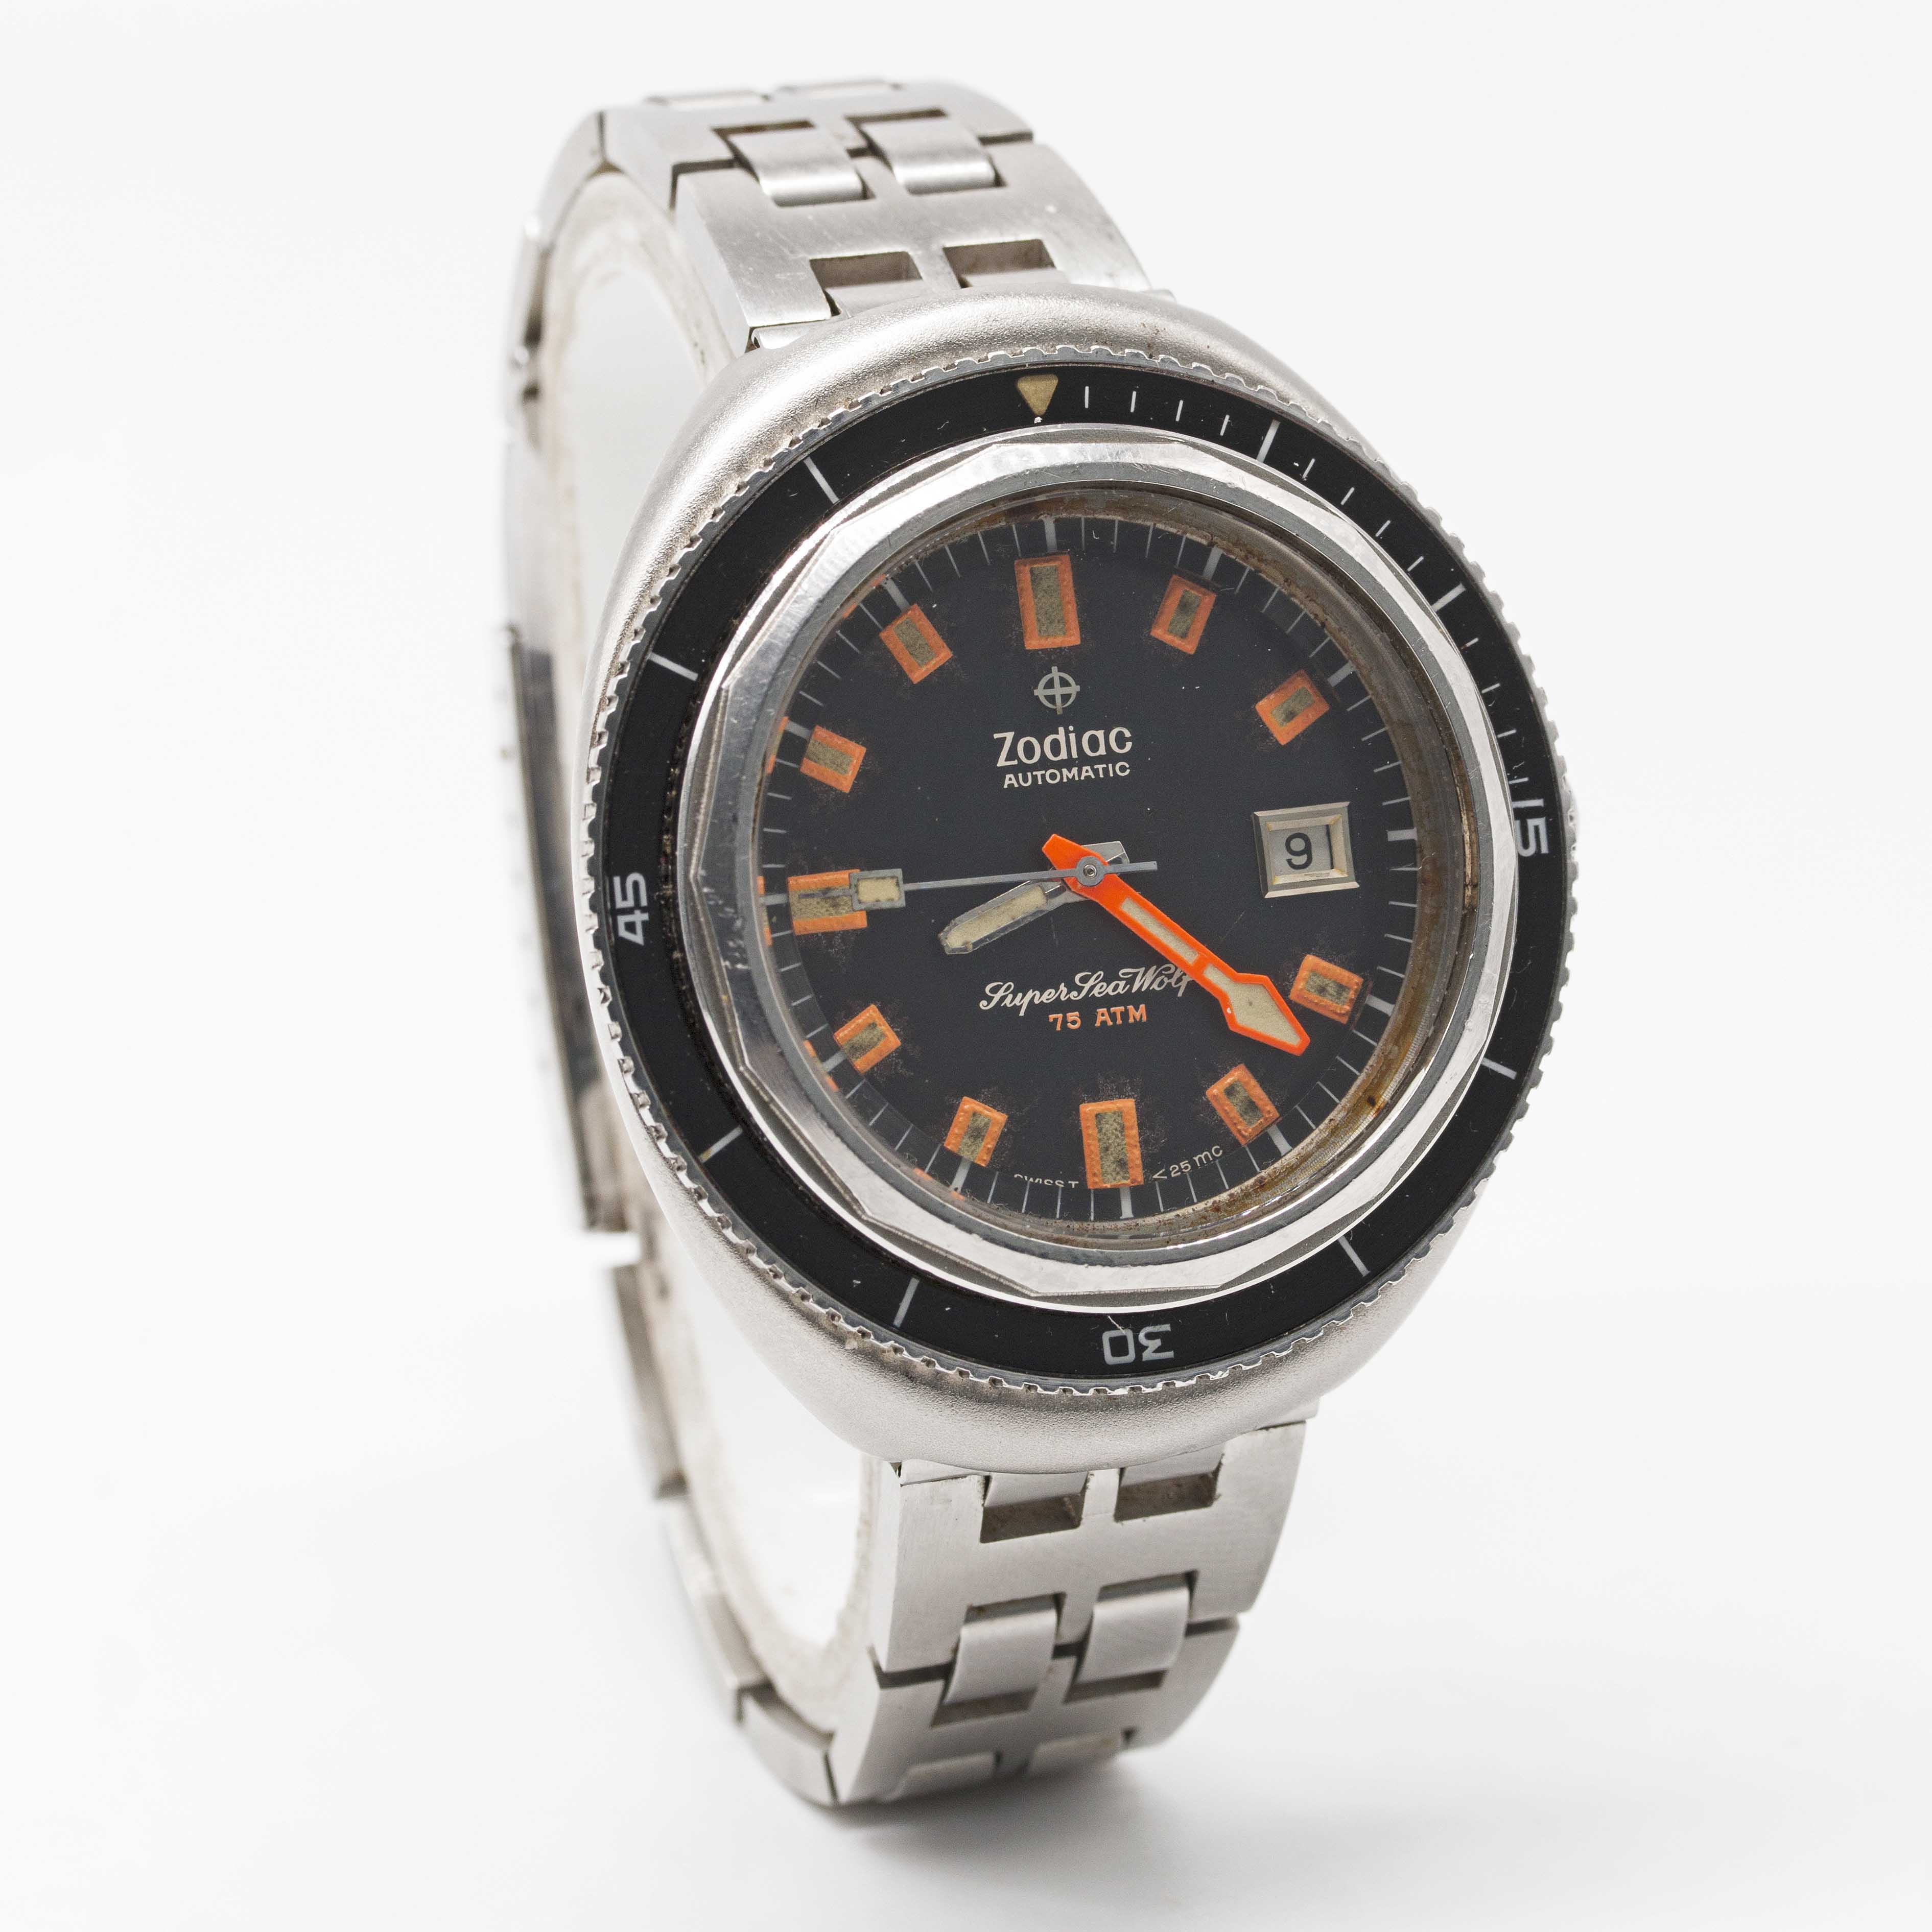 A GENTLEMAN'S STAINLESS STEEL ZODIAC SUPER SEA WOLF AUTOMATIC DIVERS BRACELET WATCH CIRCA 1970, REF. - Image 4 of 7